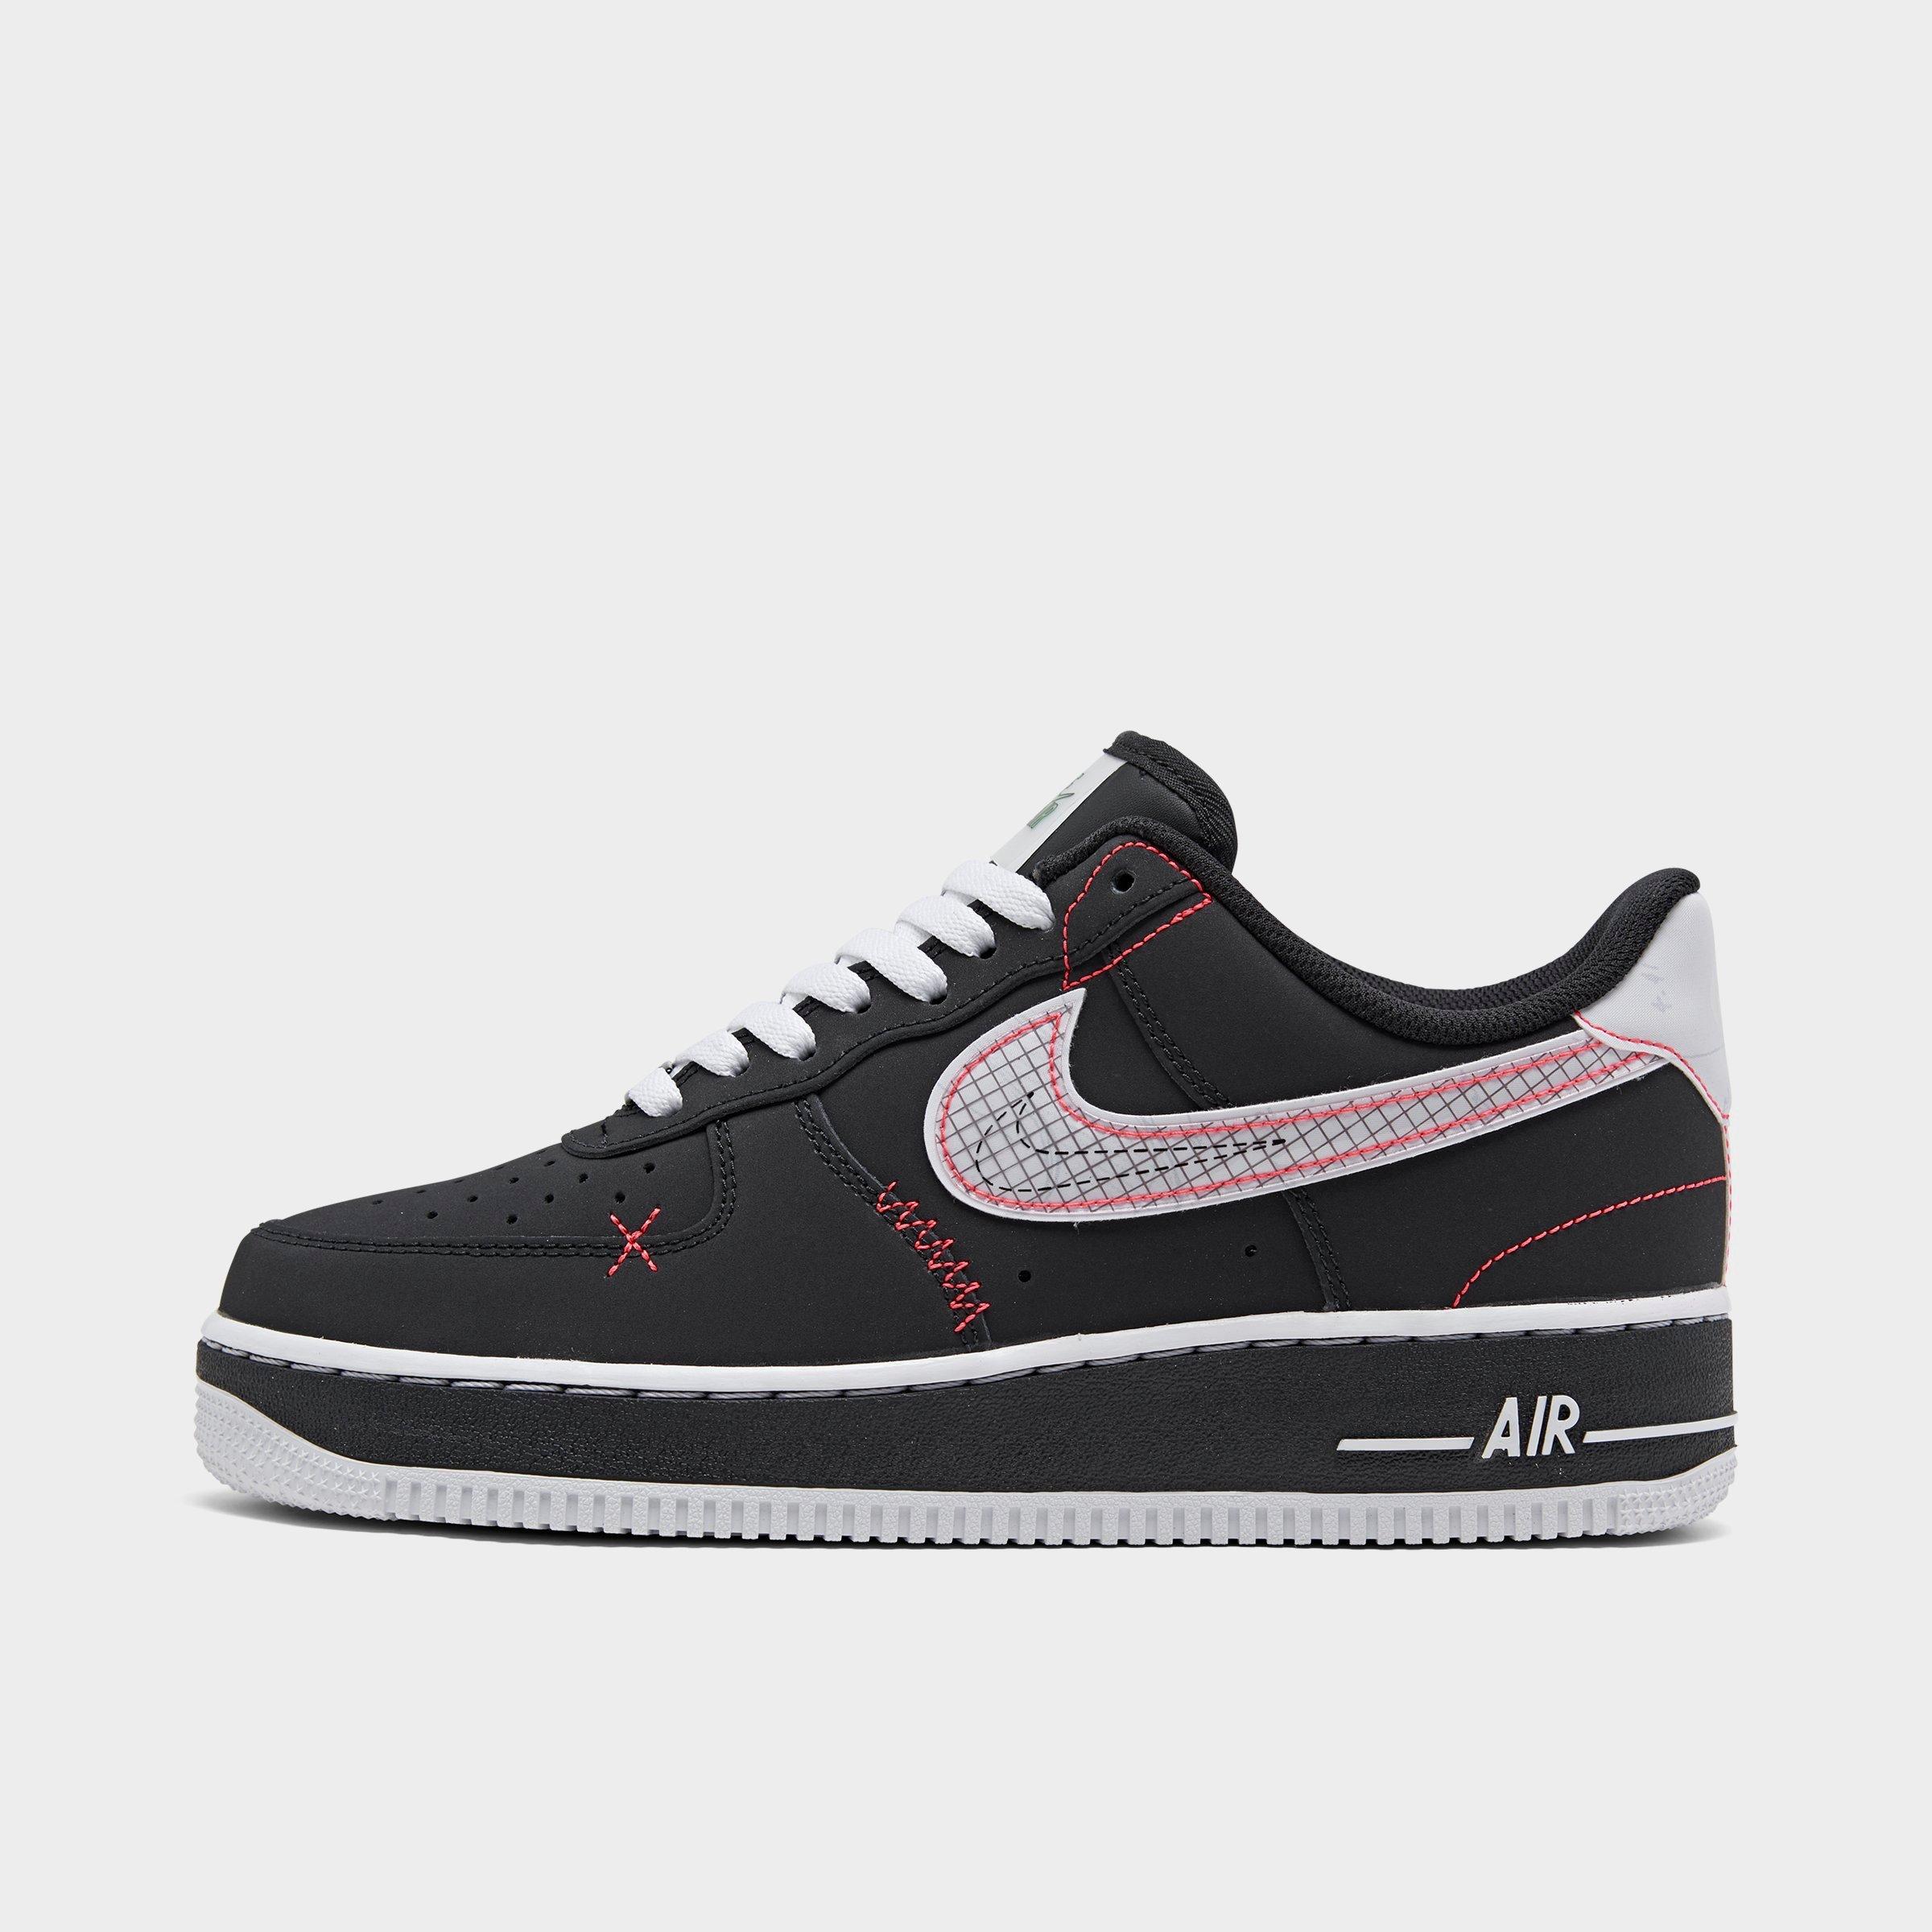 finish line air force 1 cheap online